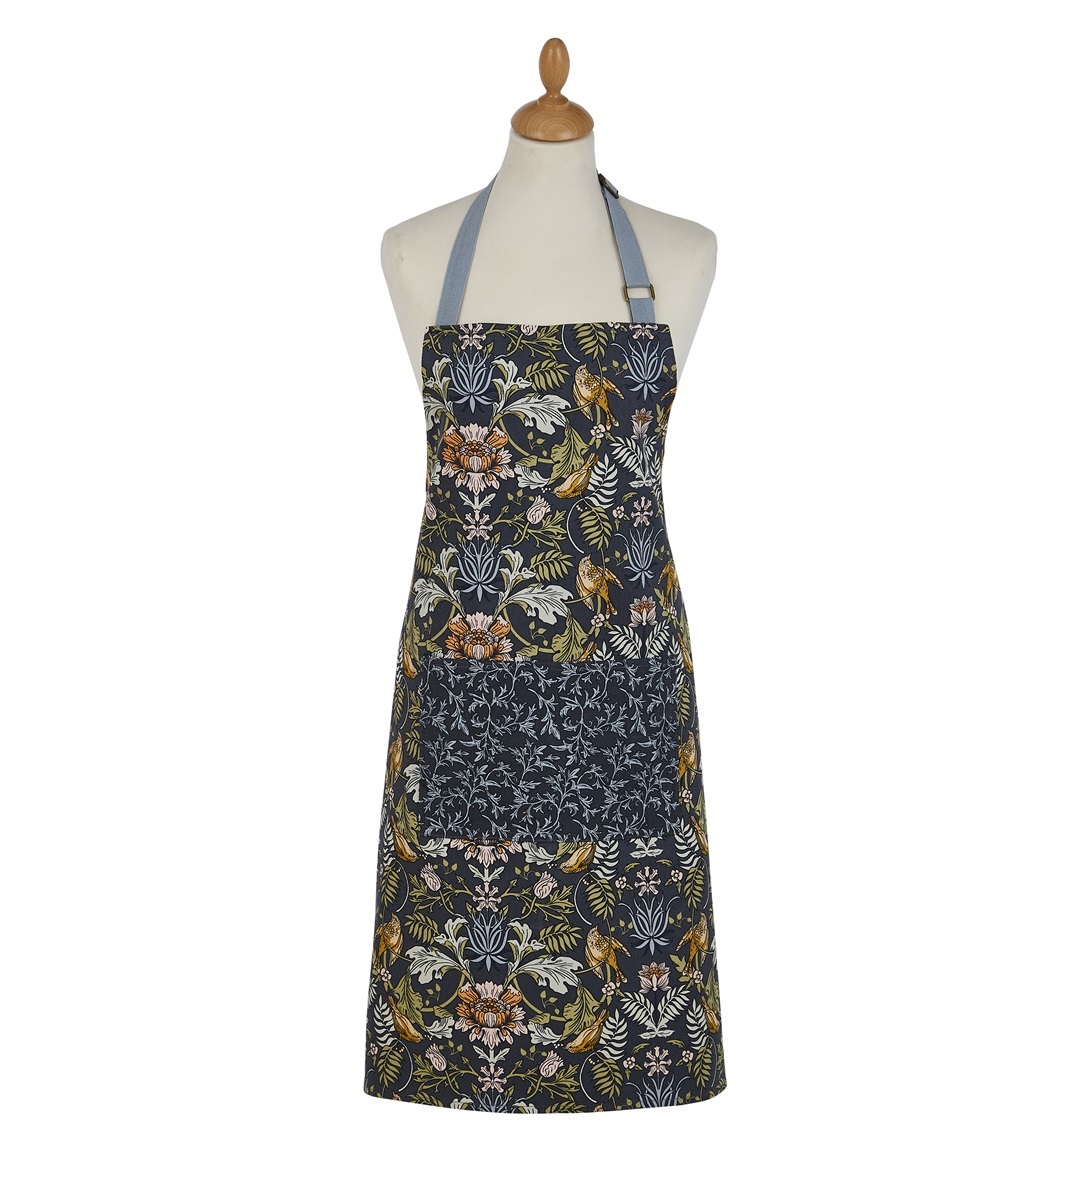 Ulster Weavers William Morris Finch and Flower Cotton Apron - Purple Holly